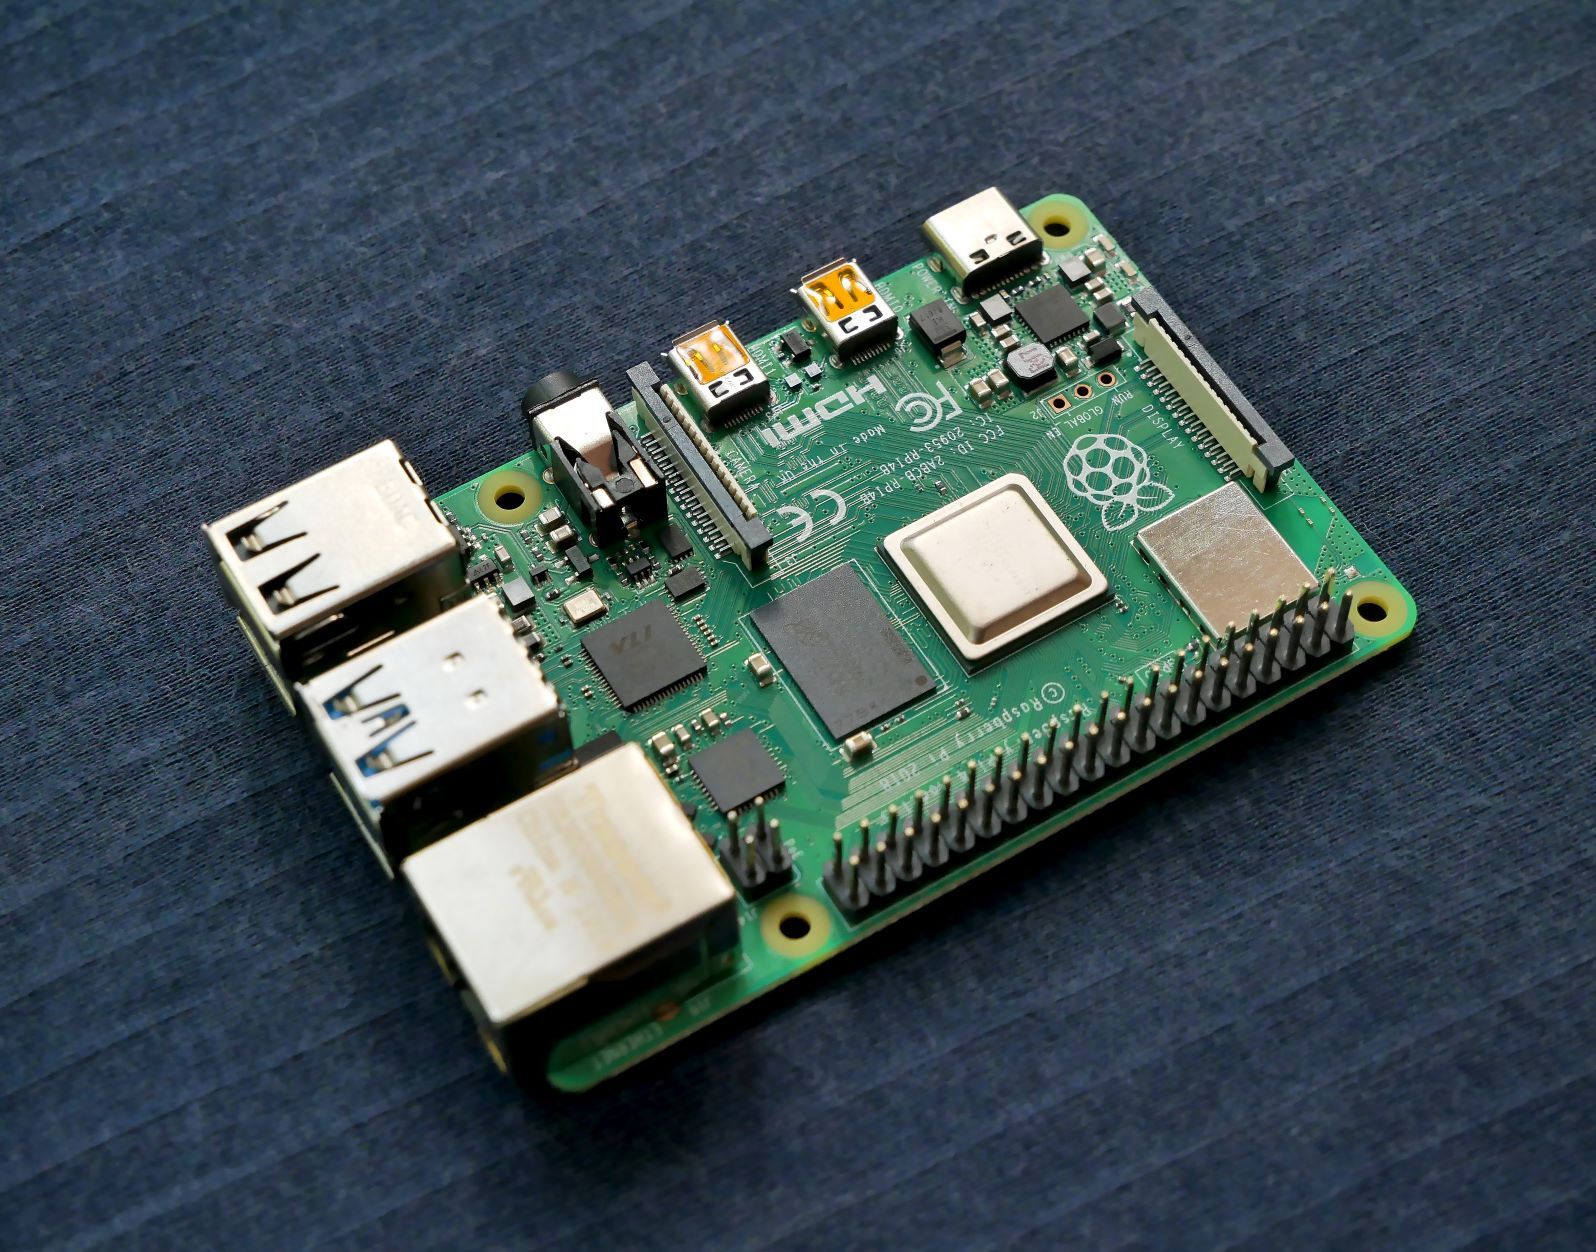 Boost Raspberry Pi Performance with Turbo mode!